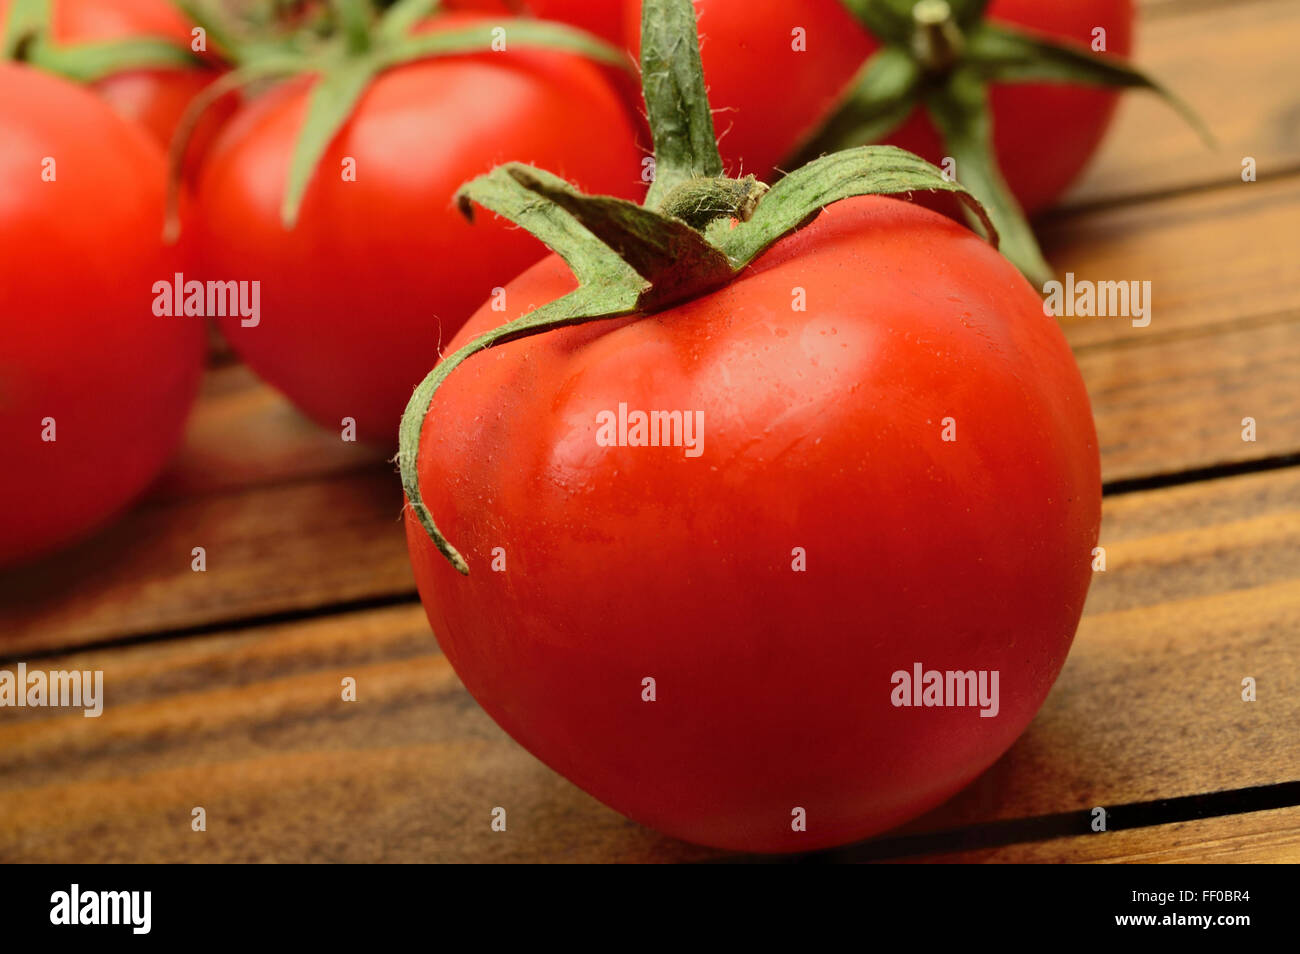 Group of tomatoes on wooden table Stock Photo